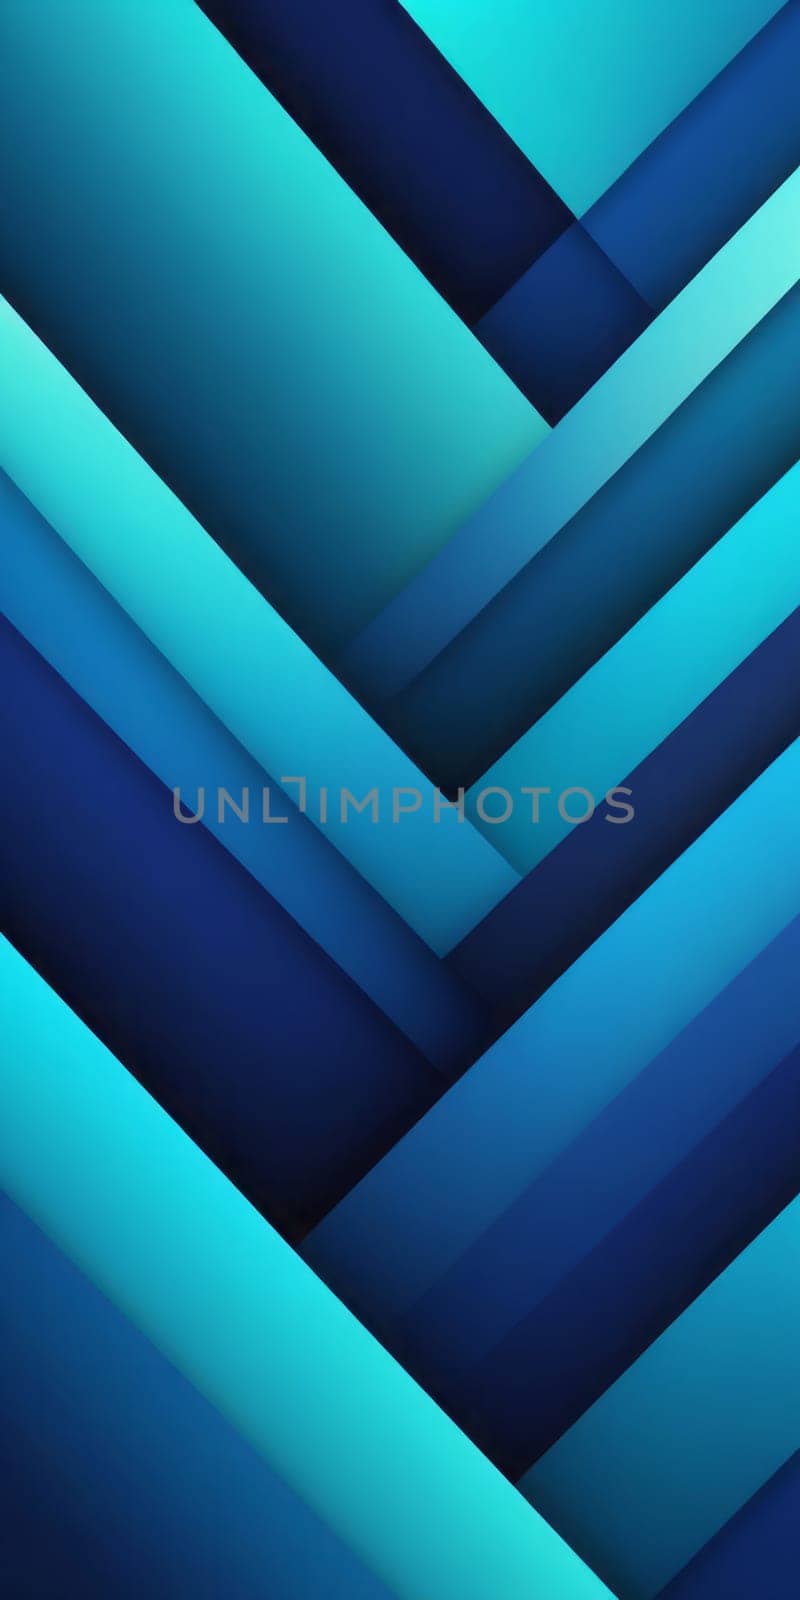 Angular Shapes in Aqua and Blue by nkotlyar